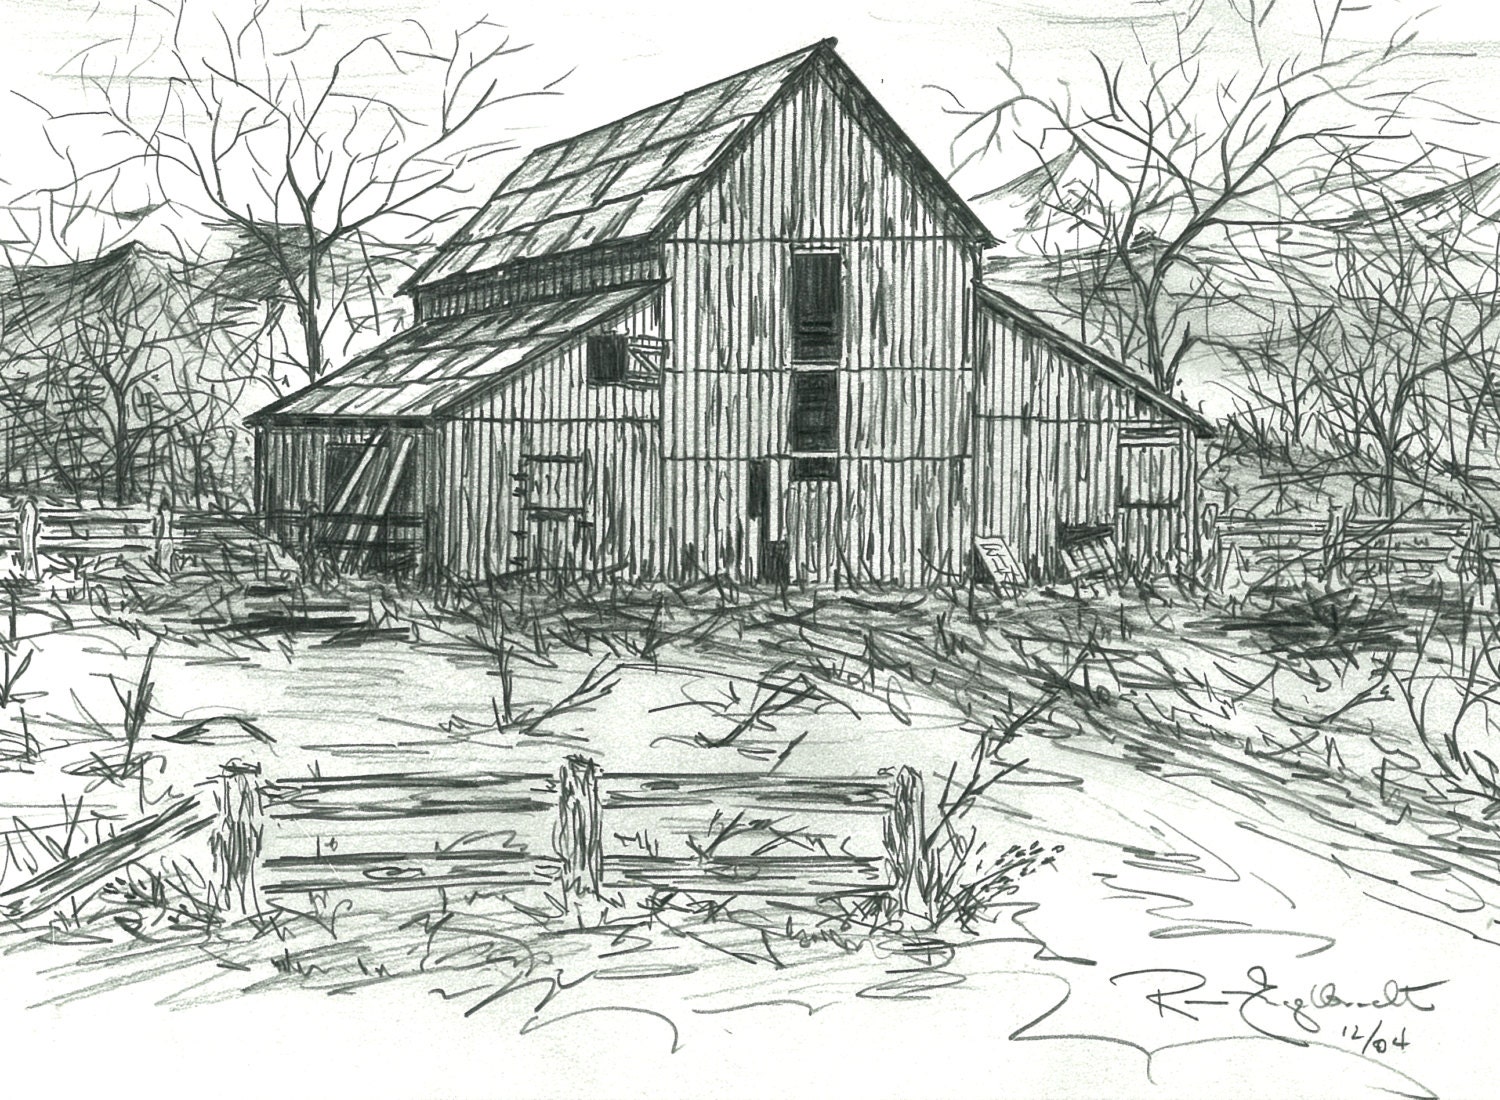 Pencil sketches of Old Barns Drawings of old barns Note